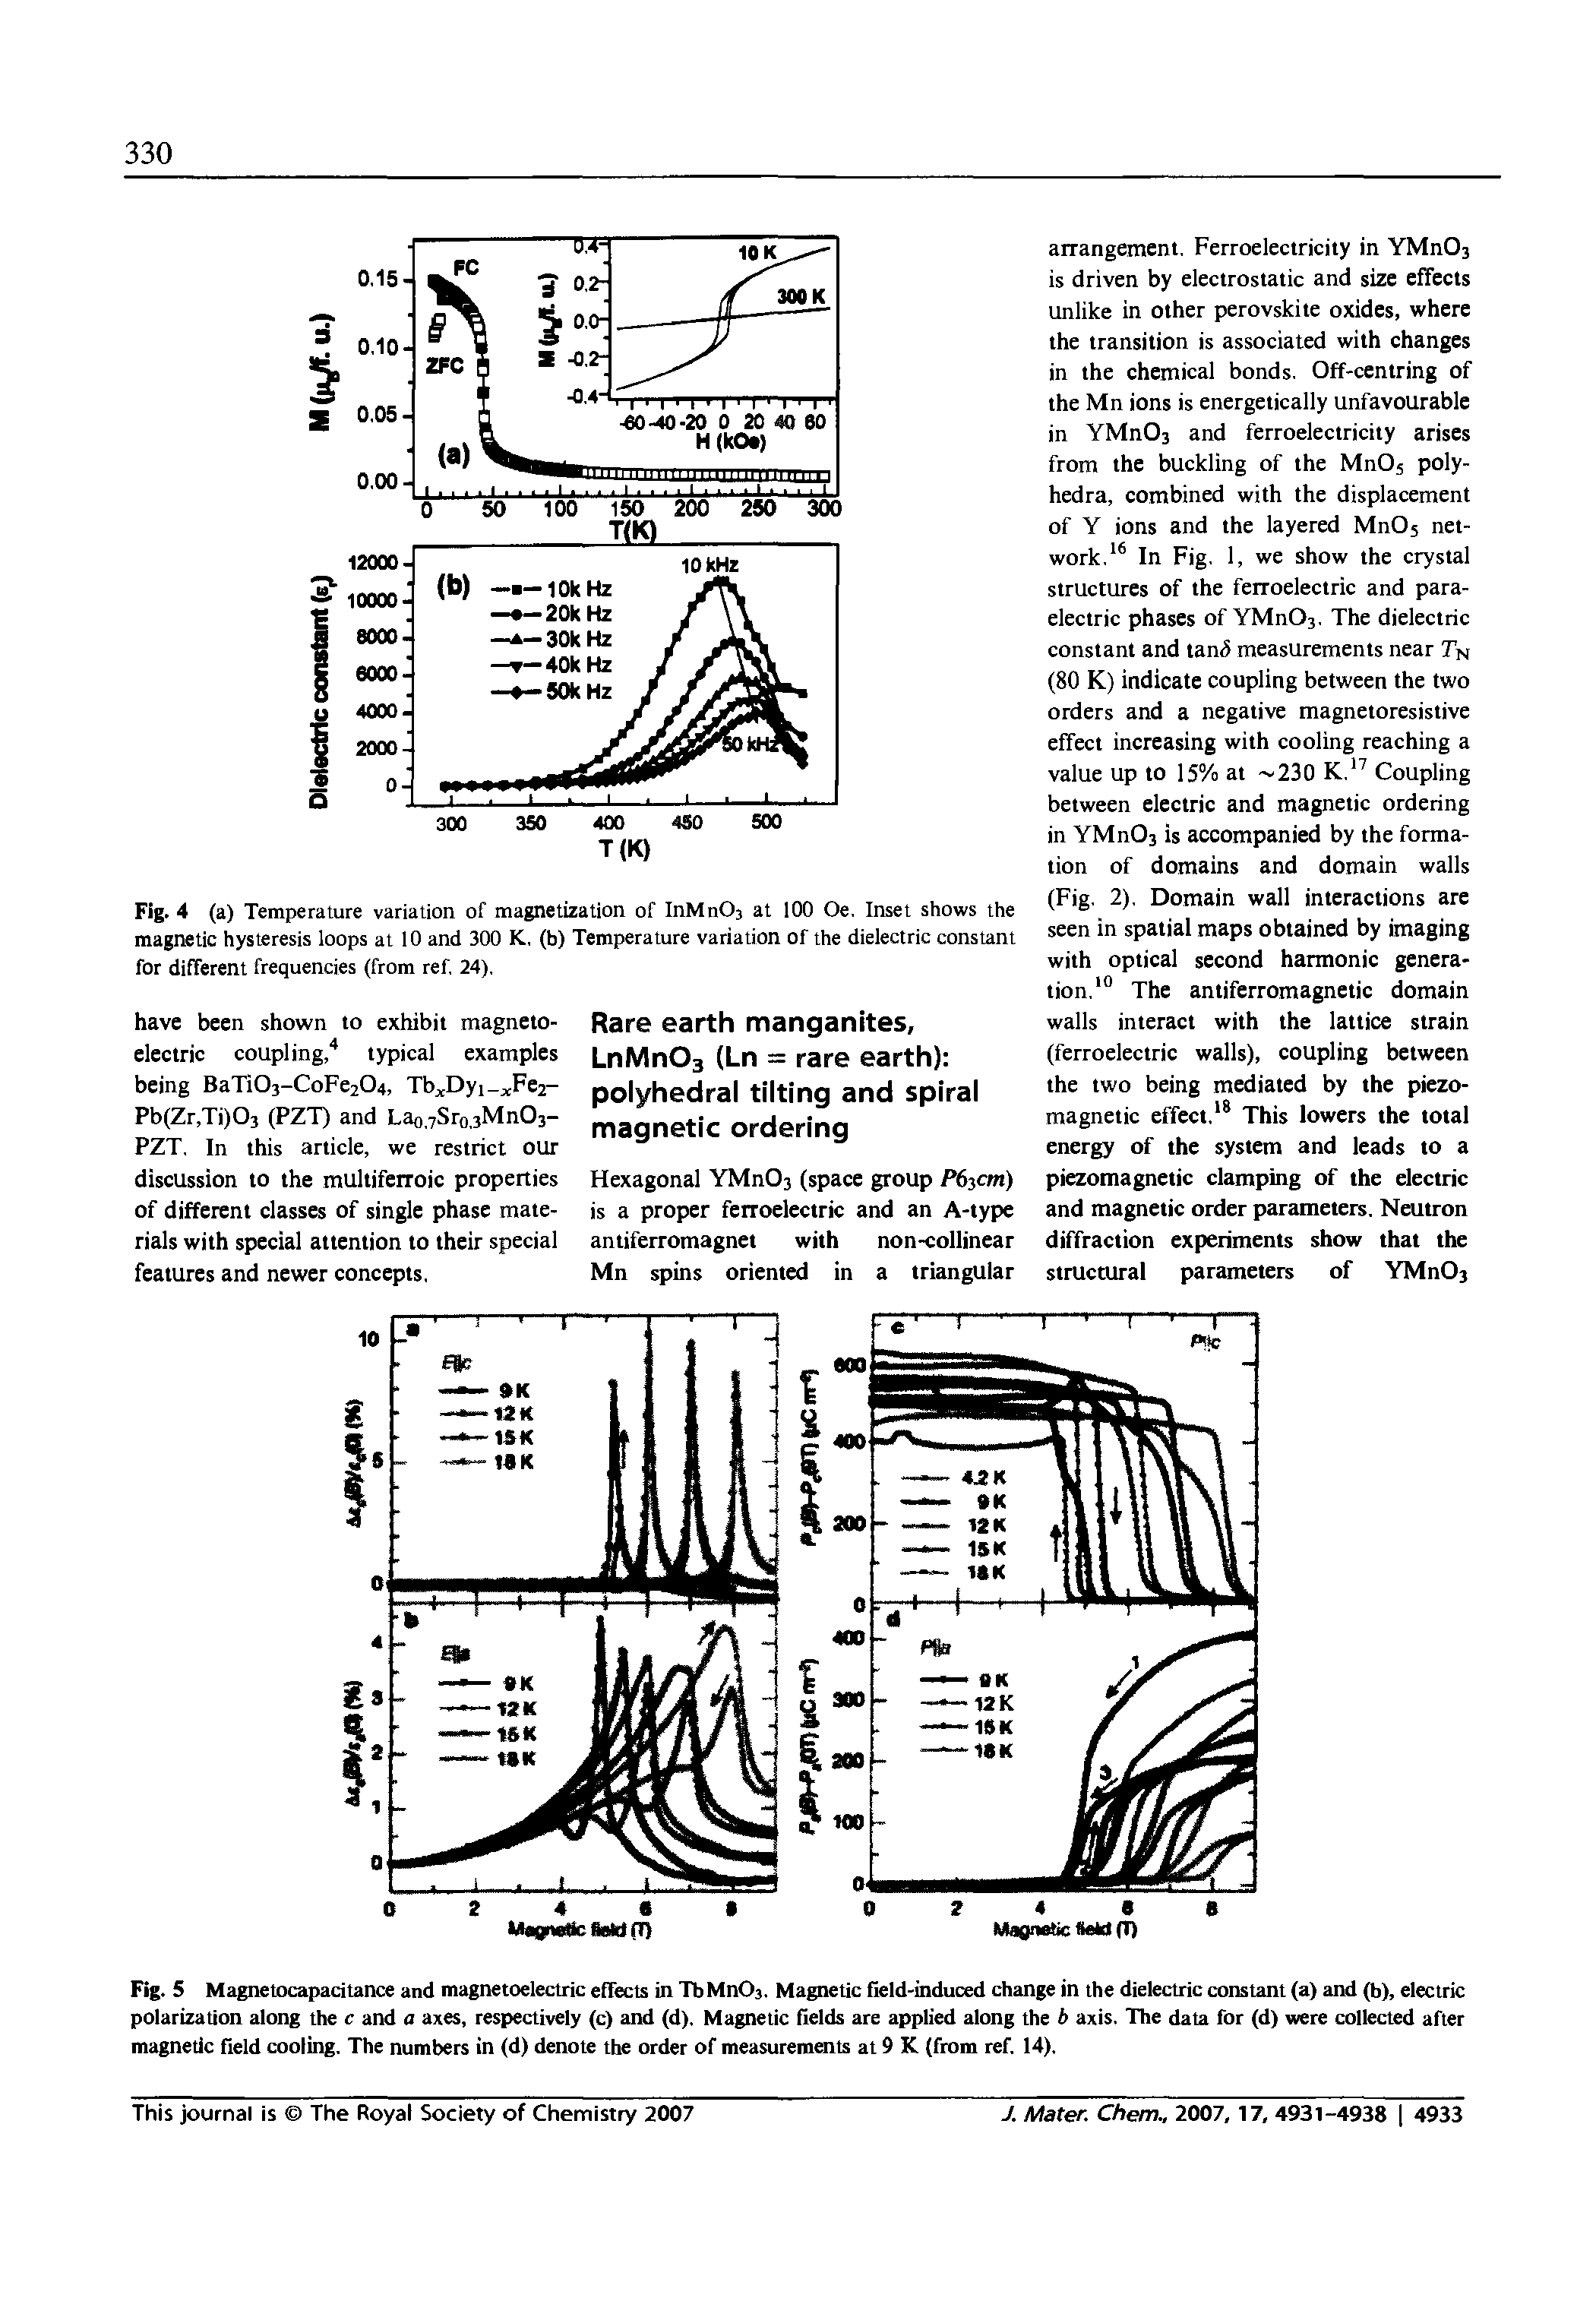 Fig. 5 Magnetocapacitance and magnetoelectric effects in Tb MnCri, Magnetic field-induced change in the dielectric constant (a) and (b), electric polarization along the c and a axes, respectively (c) and (d). Magnetic fields are applied along the b axis. The data for (d) were collected after magnetic field cooling. The numbers in (d) denote the order of measurements at 9 K (from ref. 14).